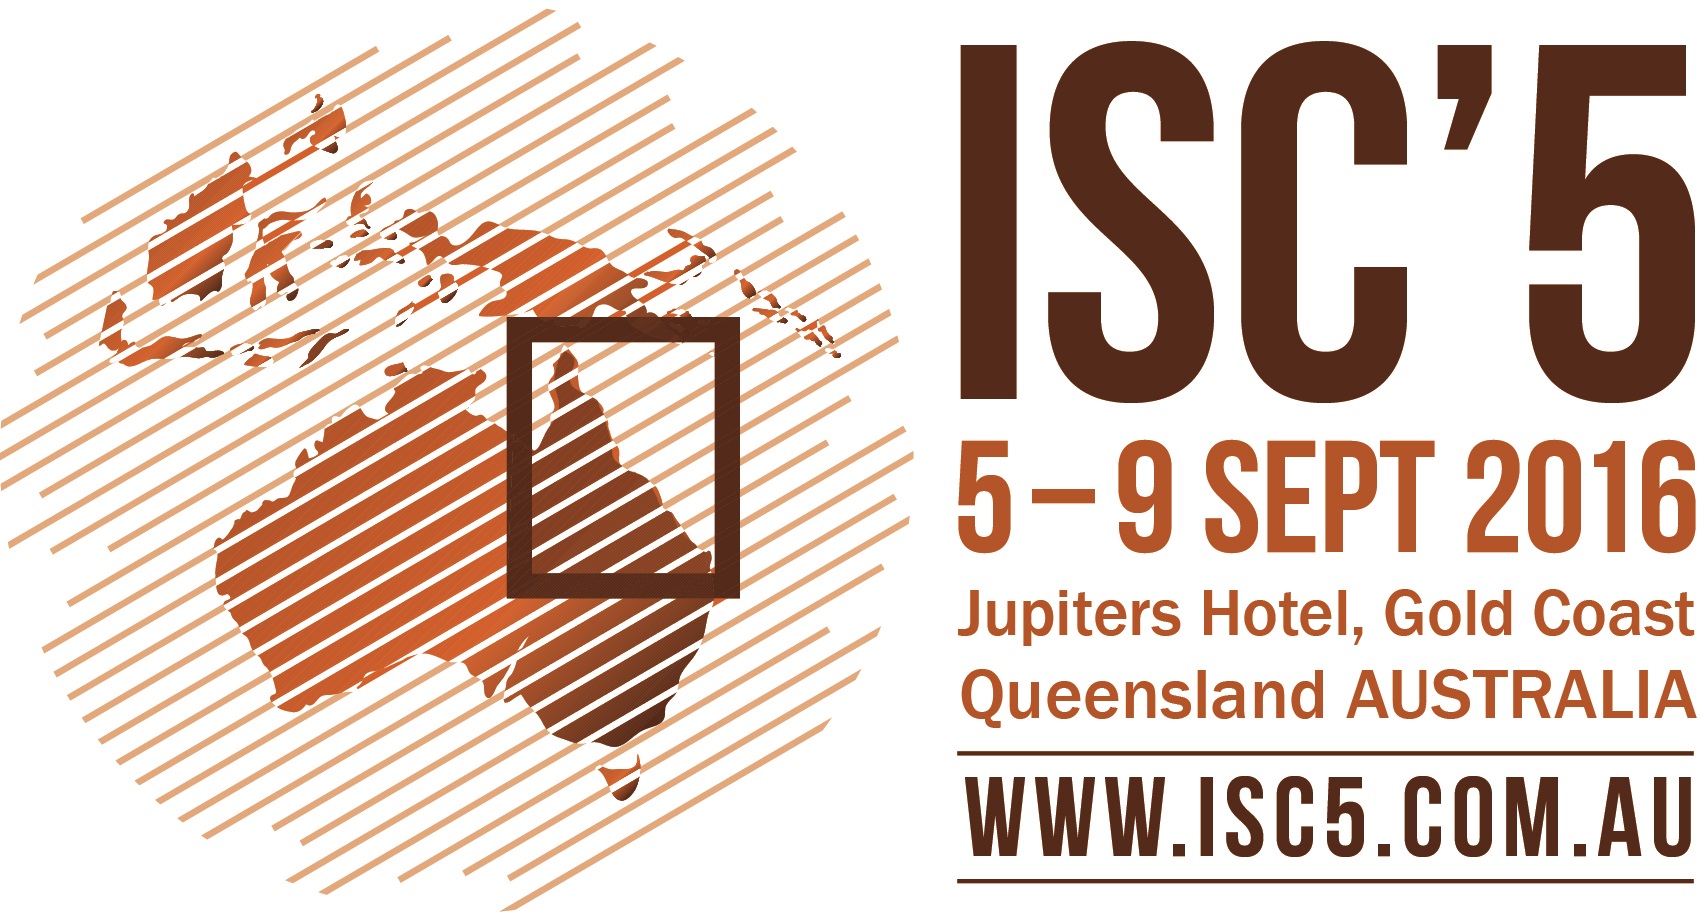 5th Int. Conf. on Geotechnical and Geophysical Site Characterisation